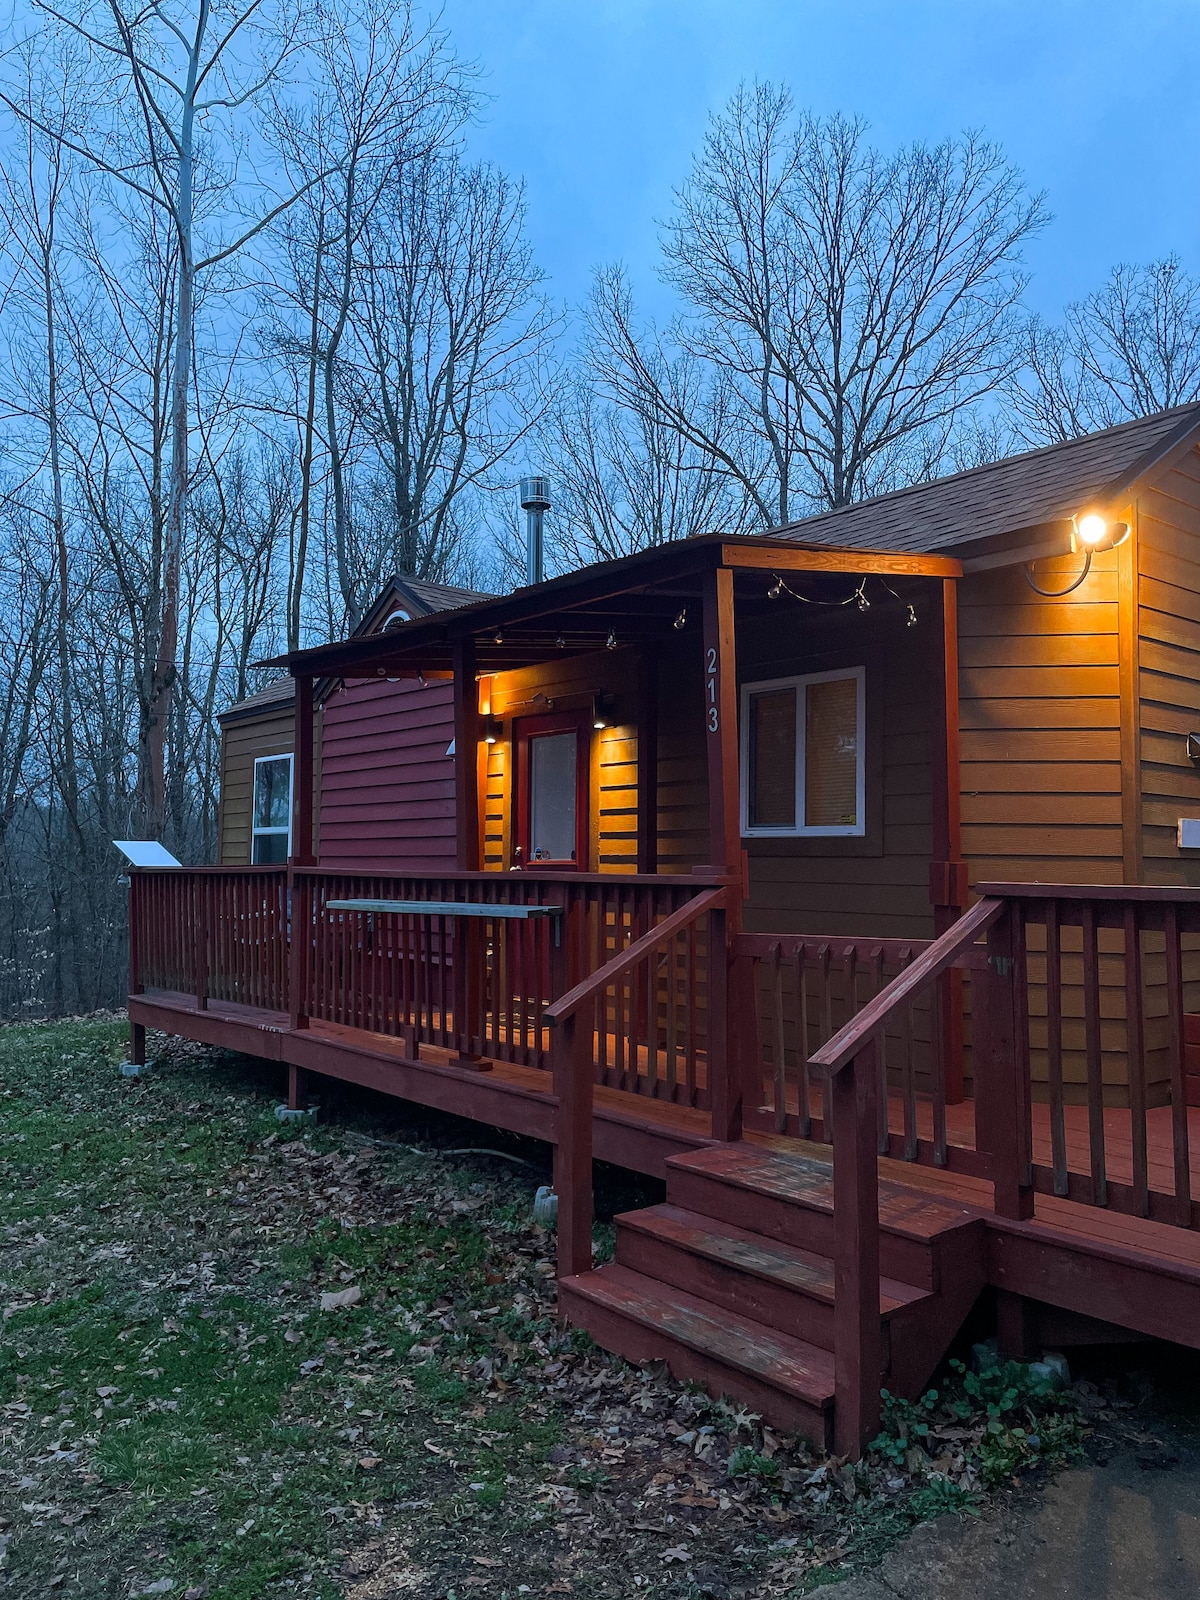 The Self-Care Tiny Cabin